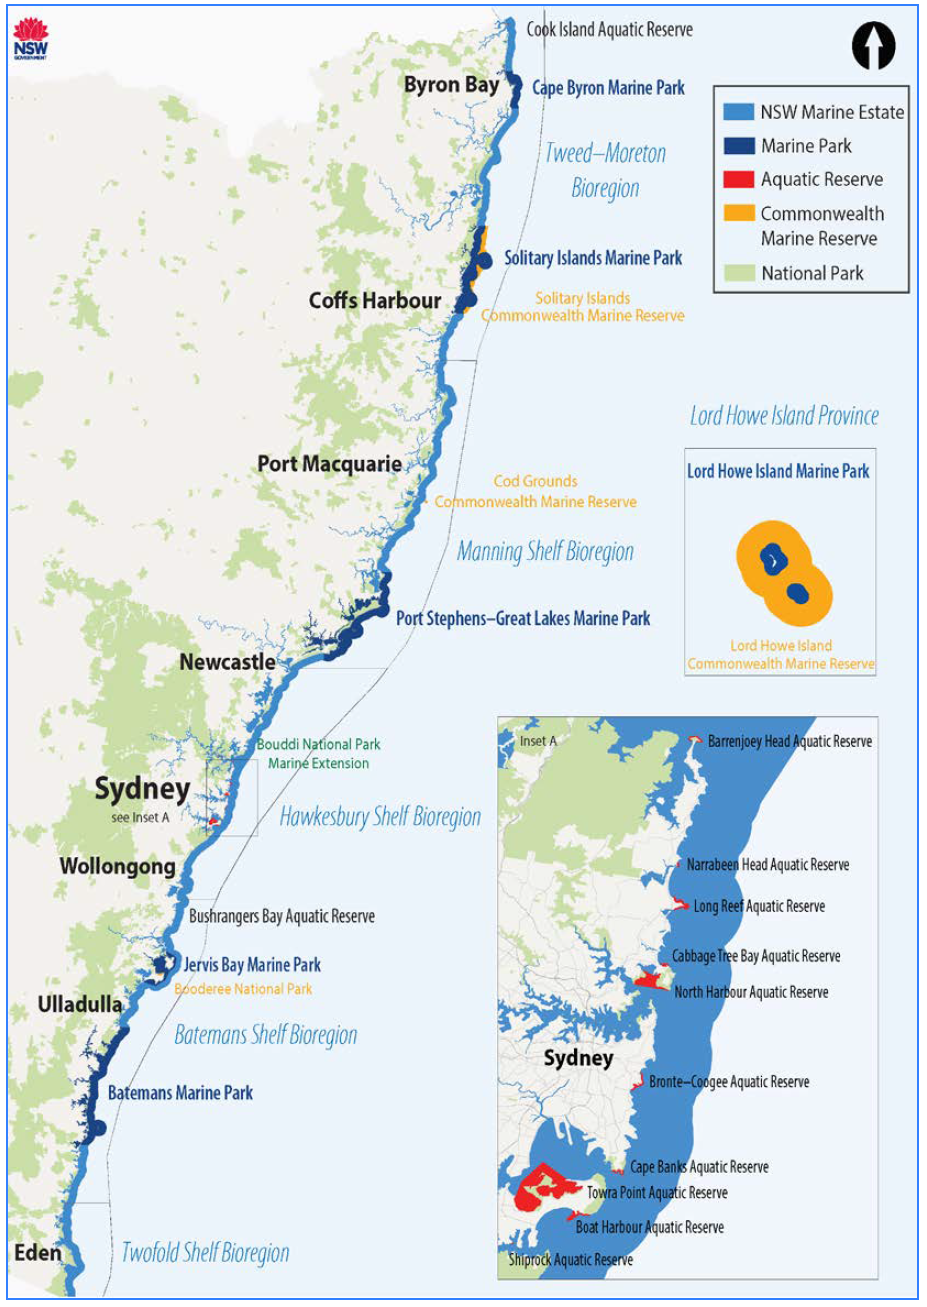 Map showing marine parks and aquatic reserves along the NSW coast with more detailed inserts of Sydney coastline and Lord Howe Island